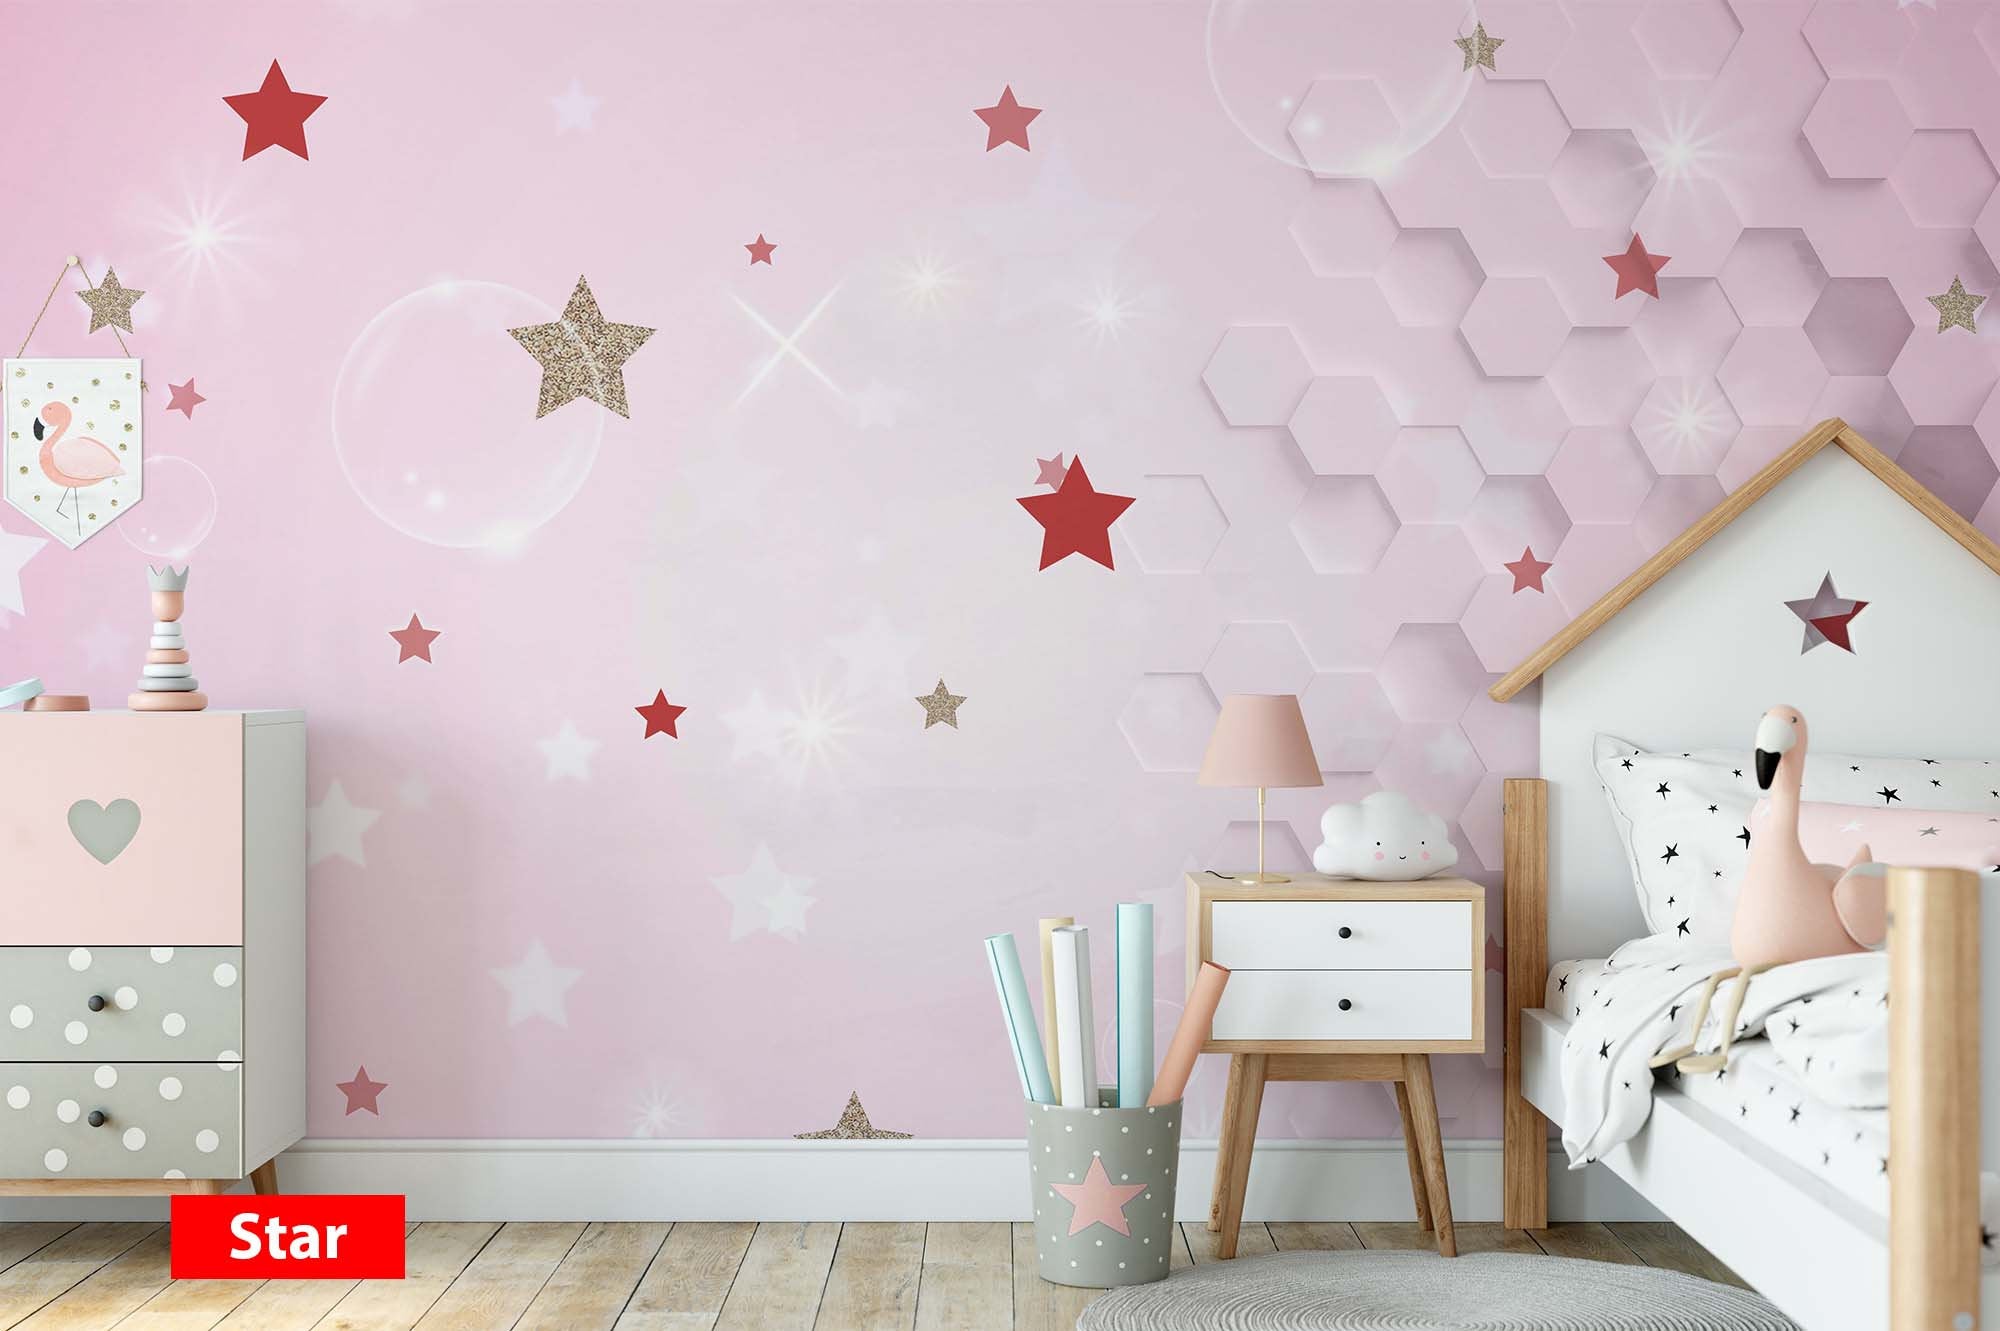 Heart Star Simple Abstract Hexagons Patterns on Pink Background Wallpaper Children Kids Room Bedroom Mural Home Decor Wall Art